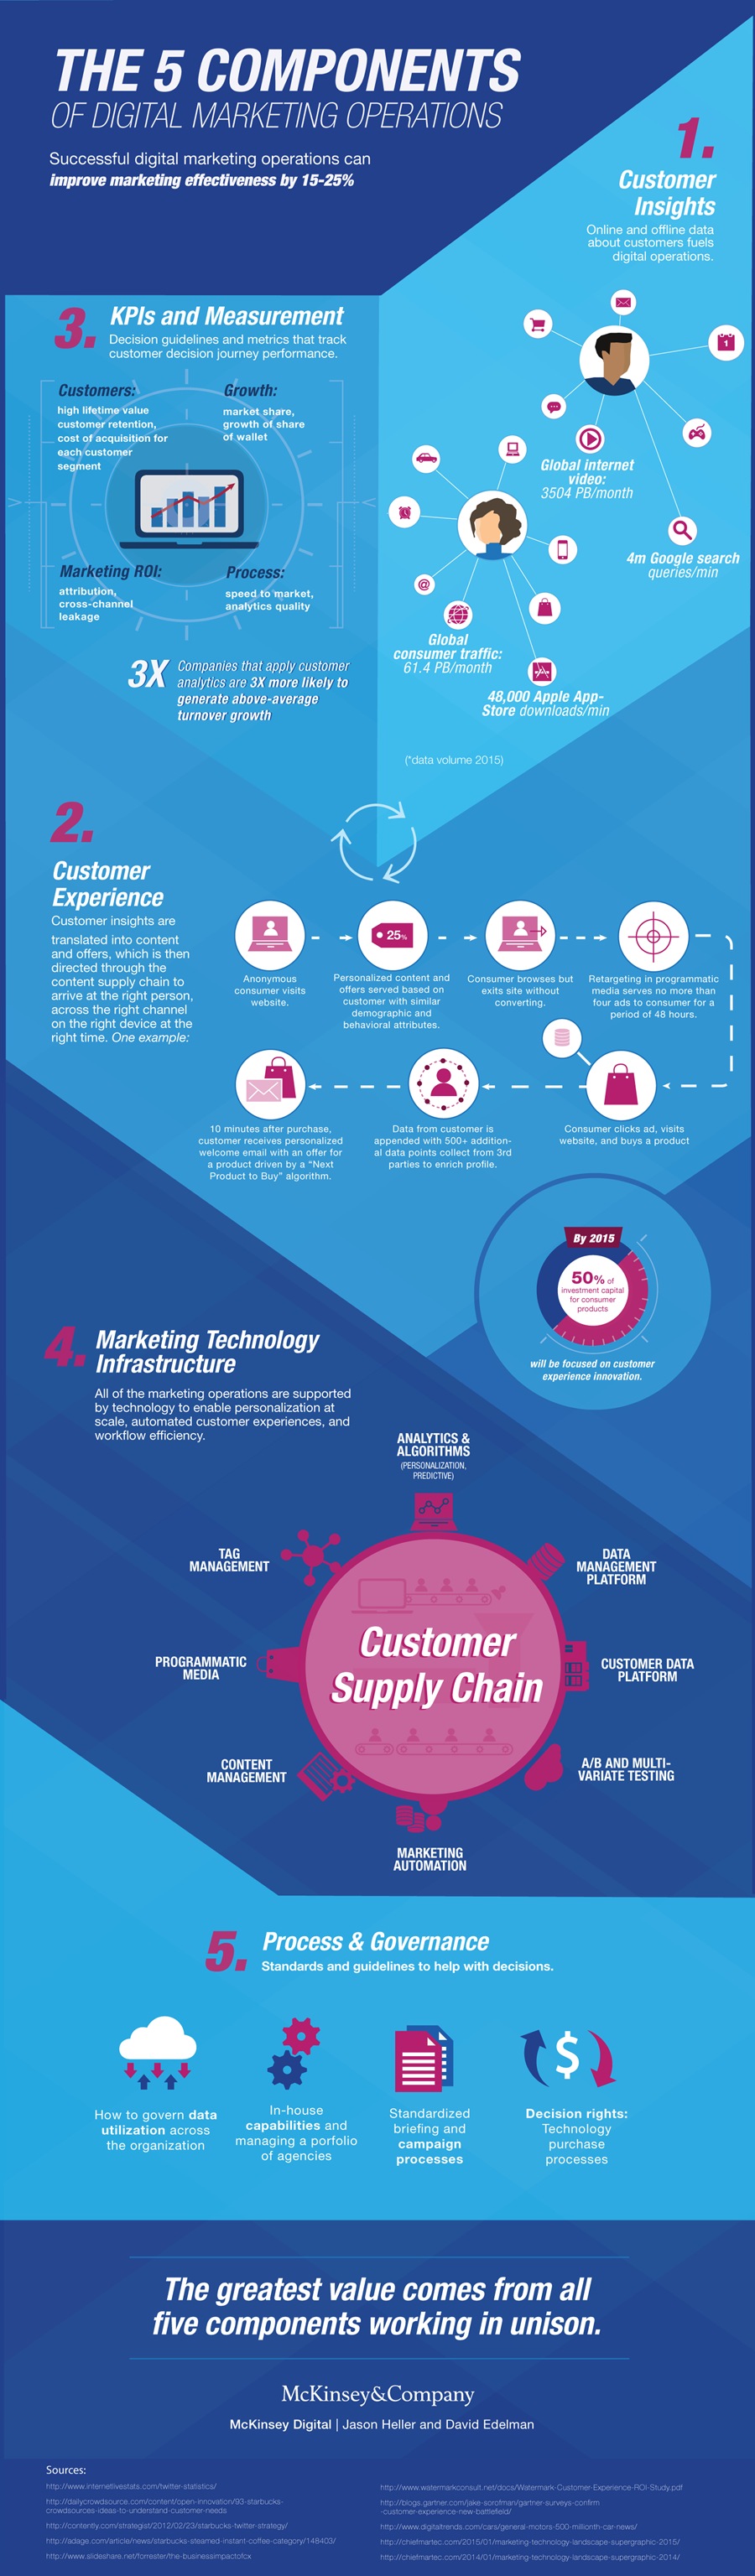 Infographic: The five components of digital marketing operations